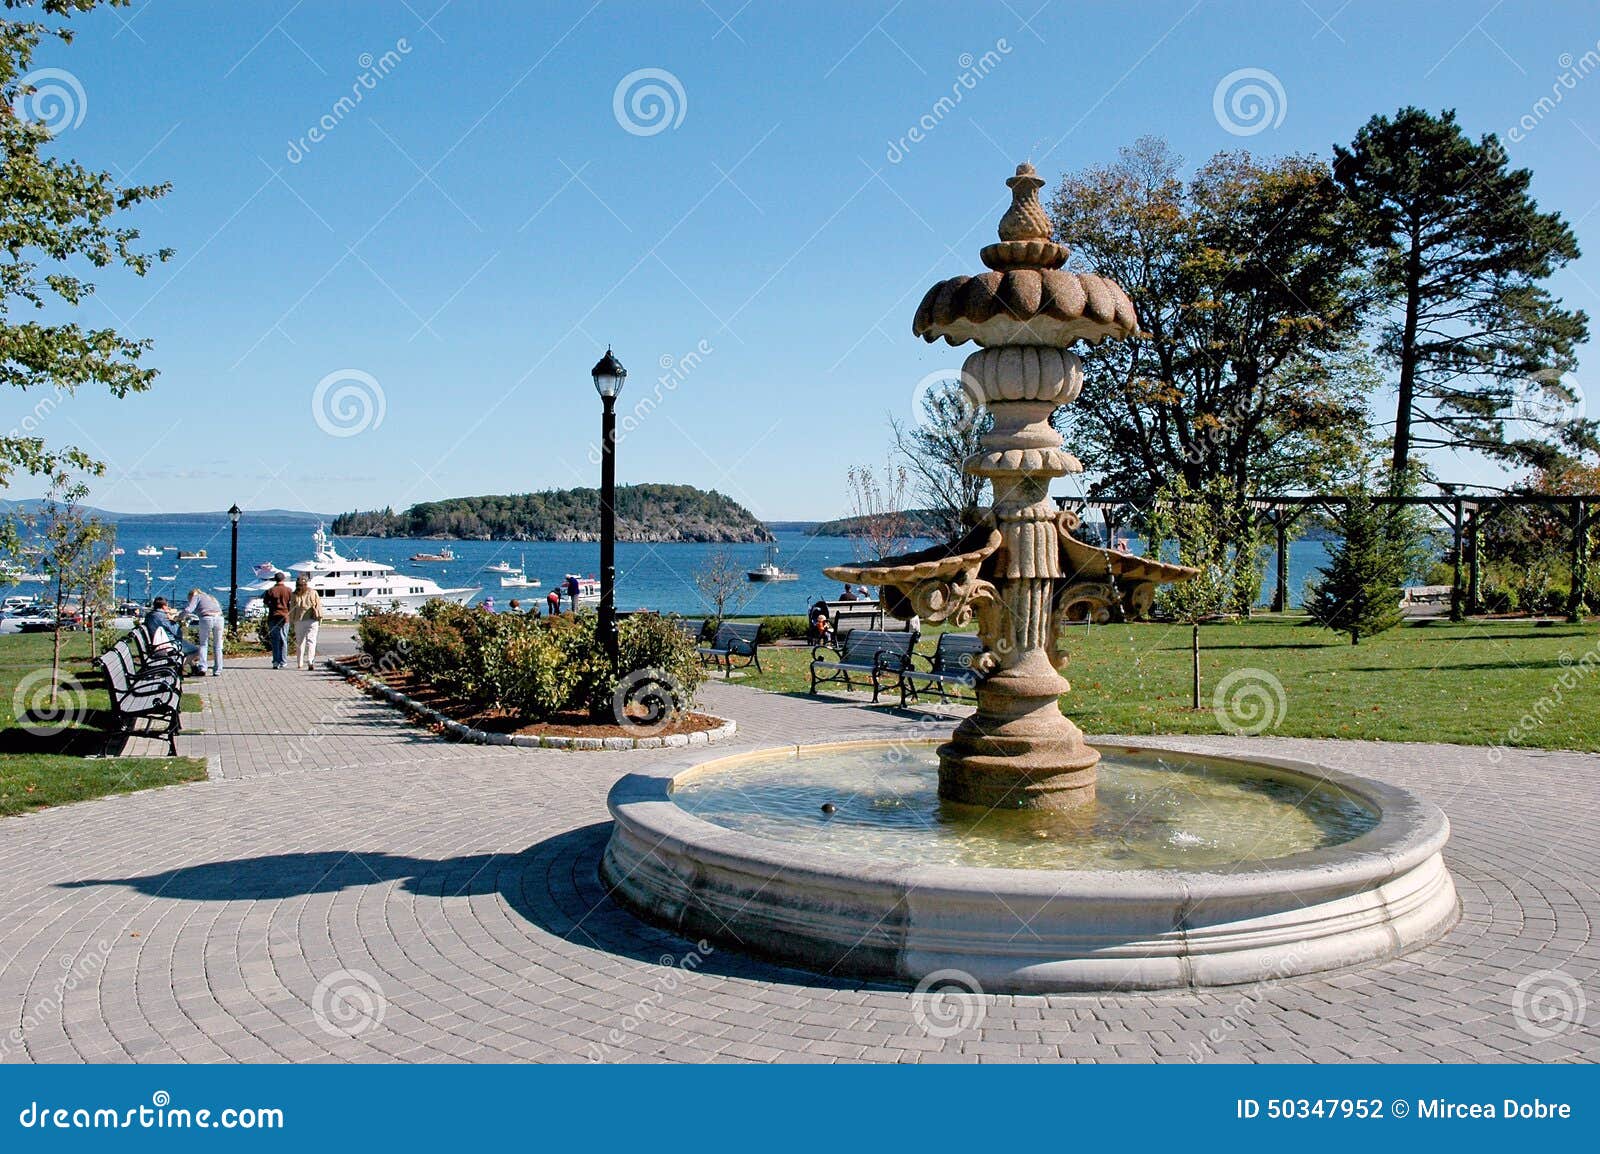 bar harbor, maine: walkway and view of the port.